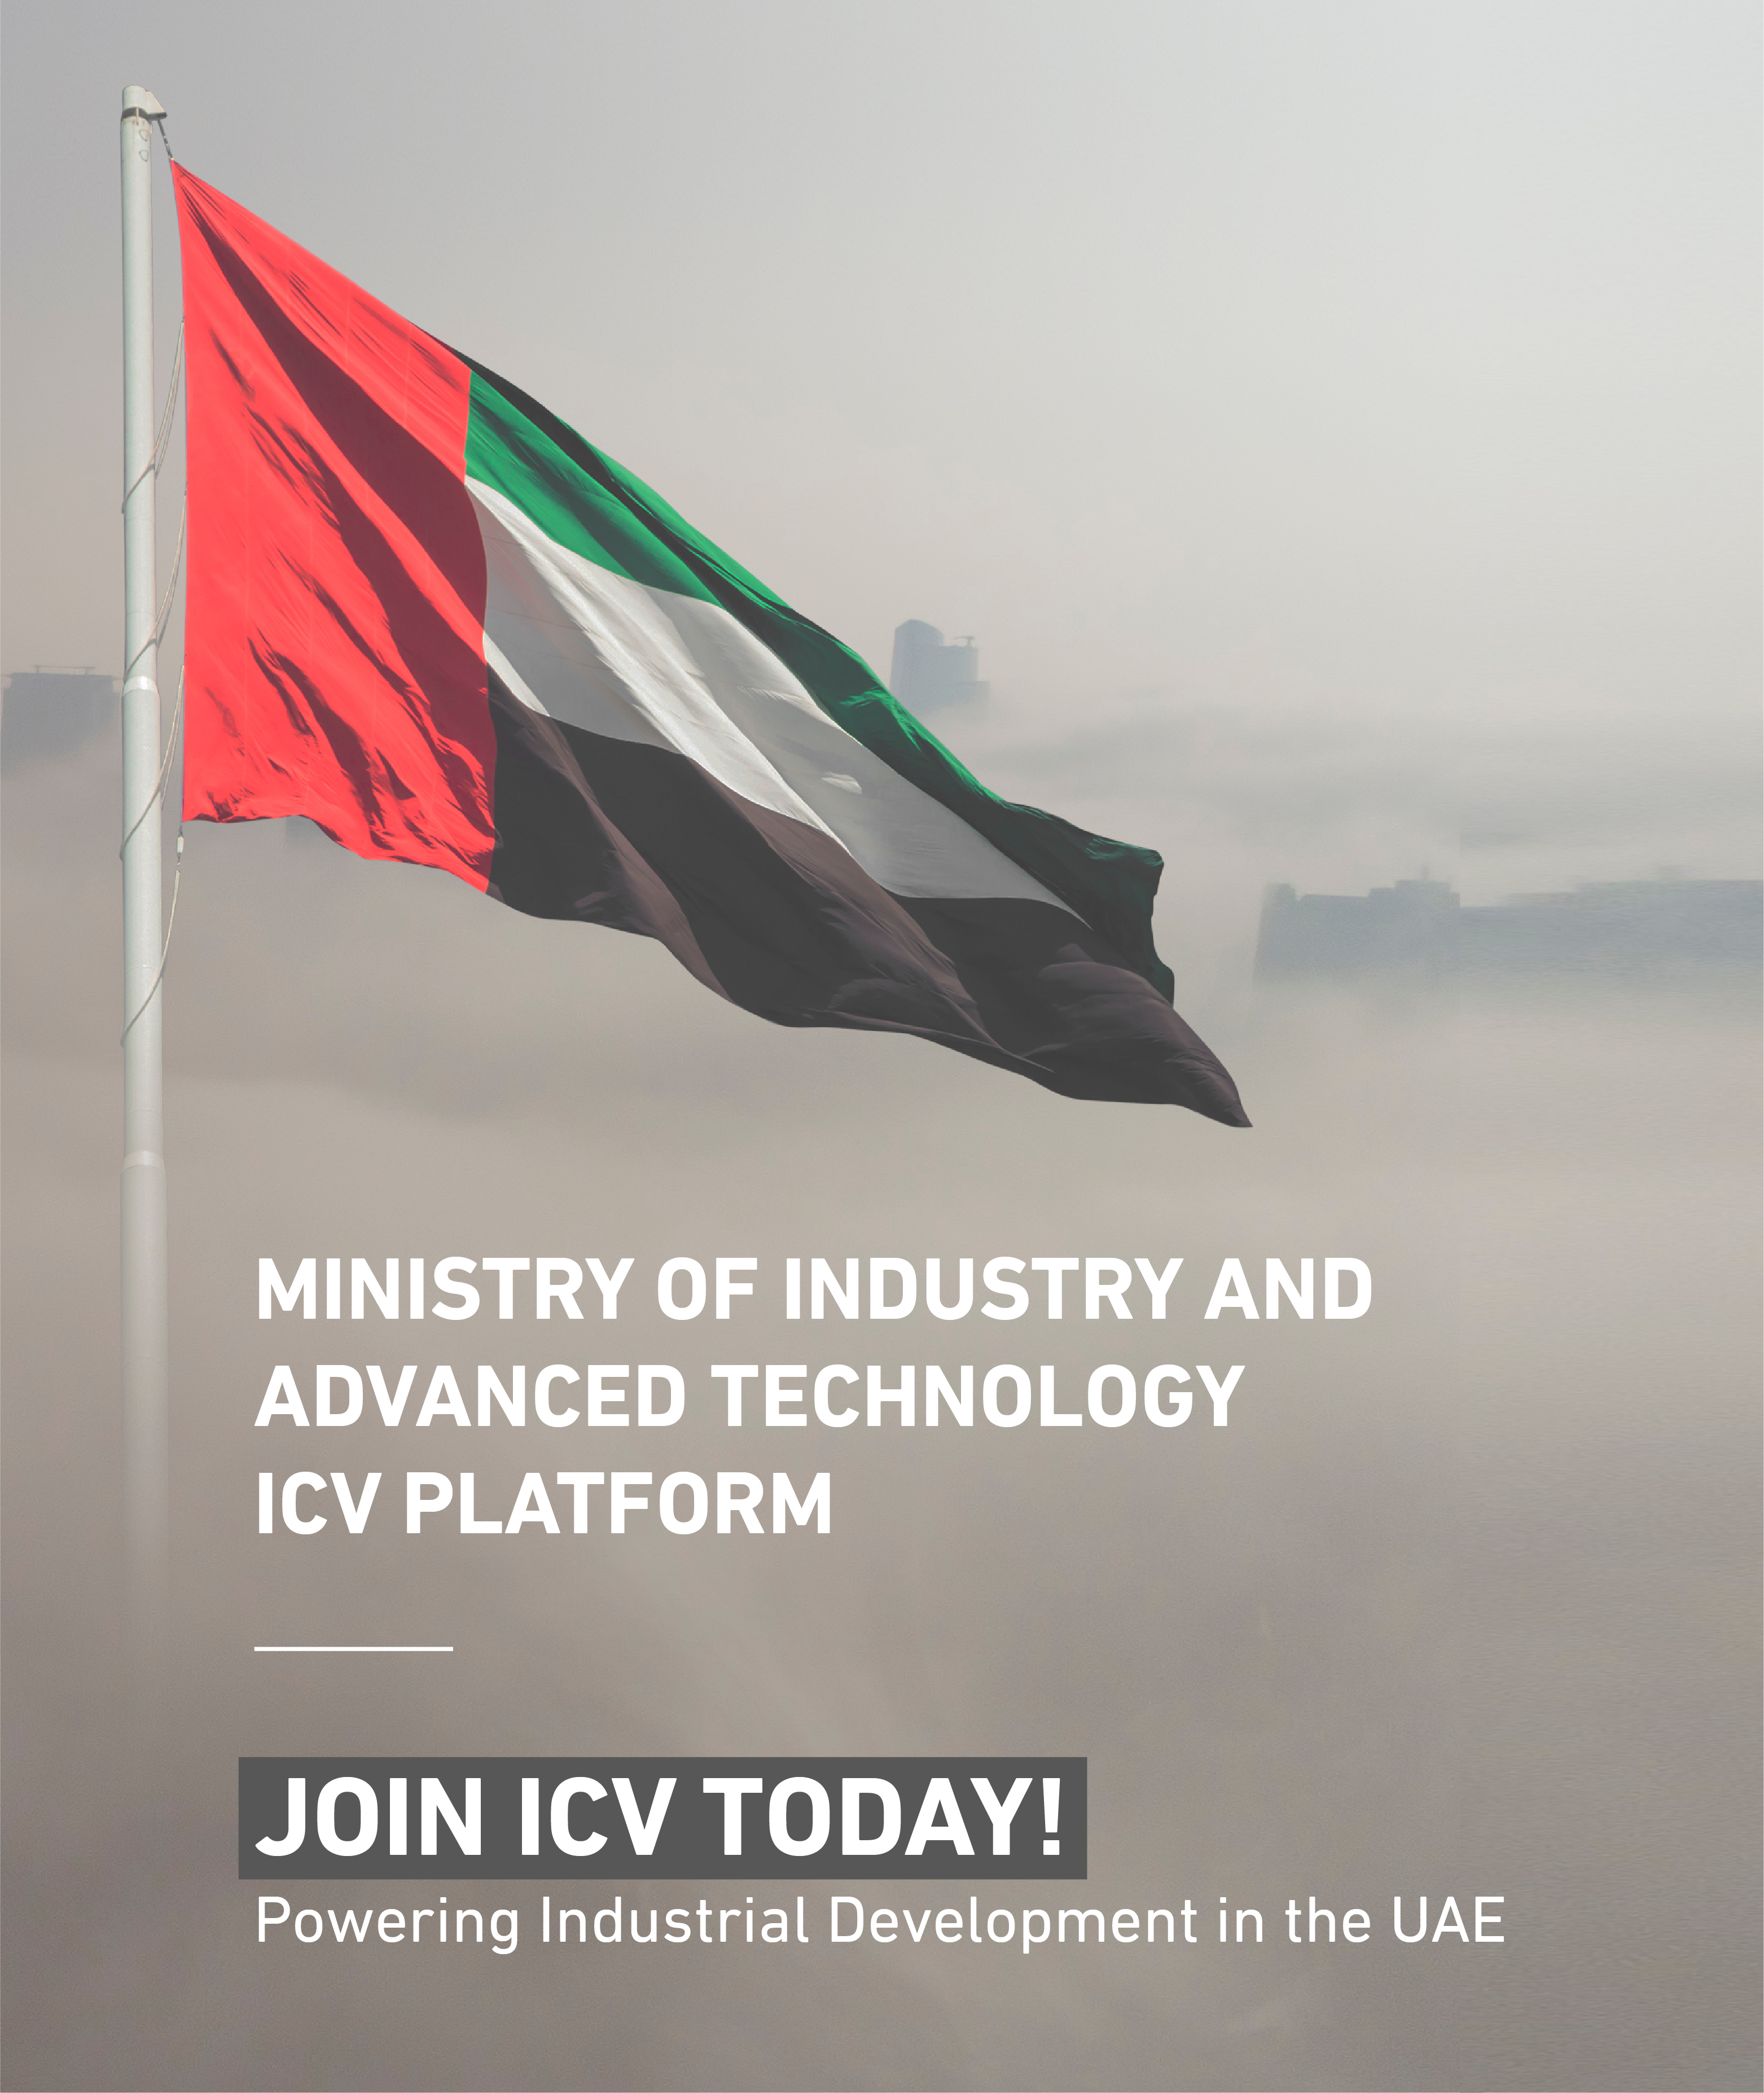 The Ministry of Industry and Advanced Technology launches digital platform for ICV Program certification